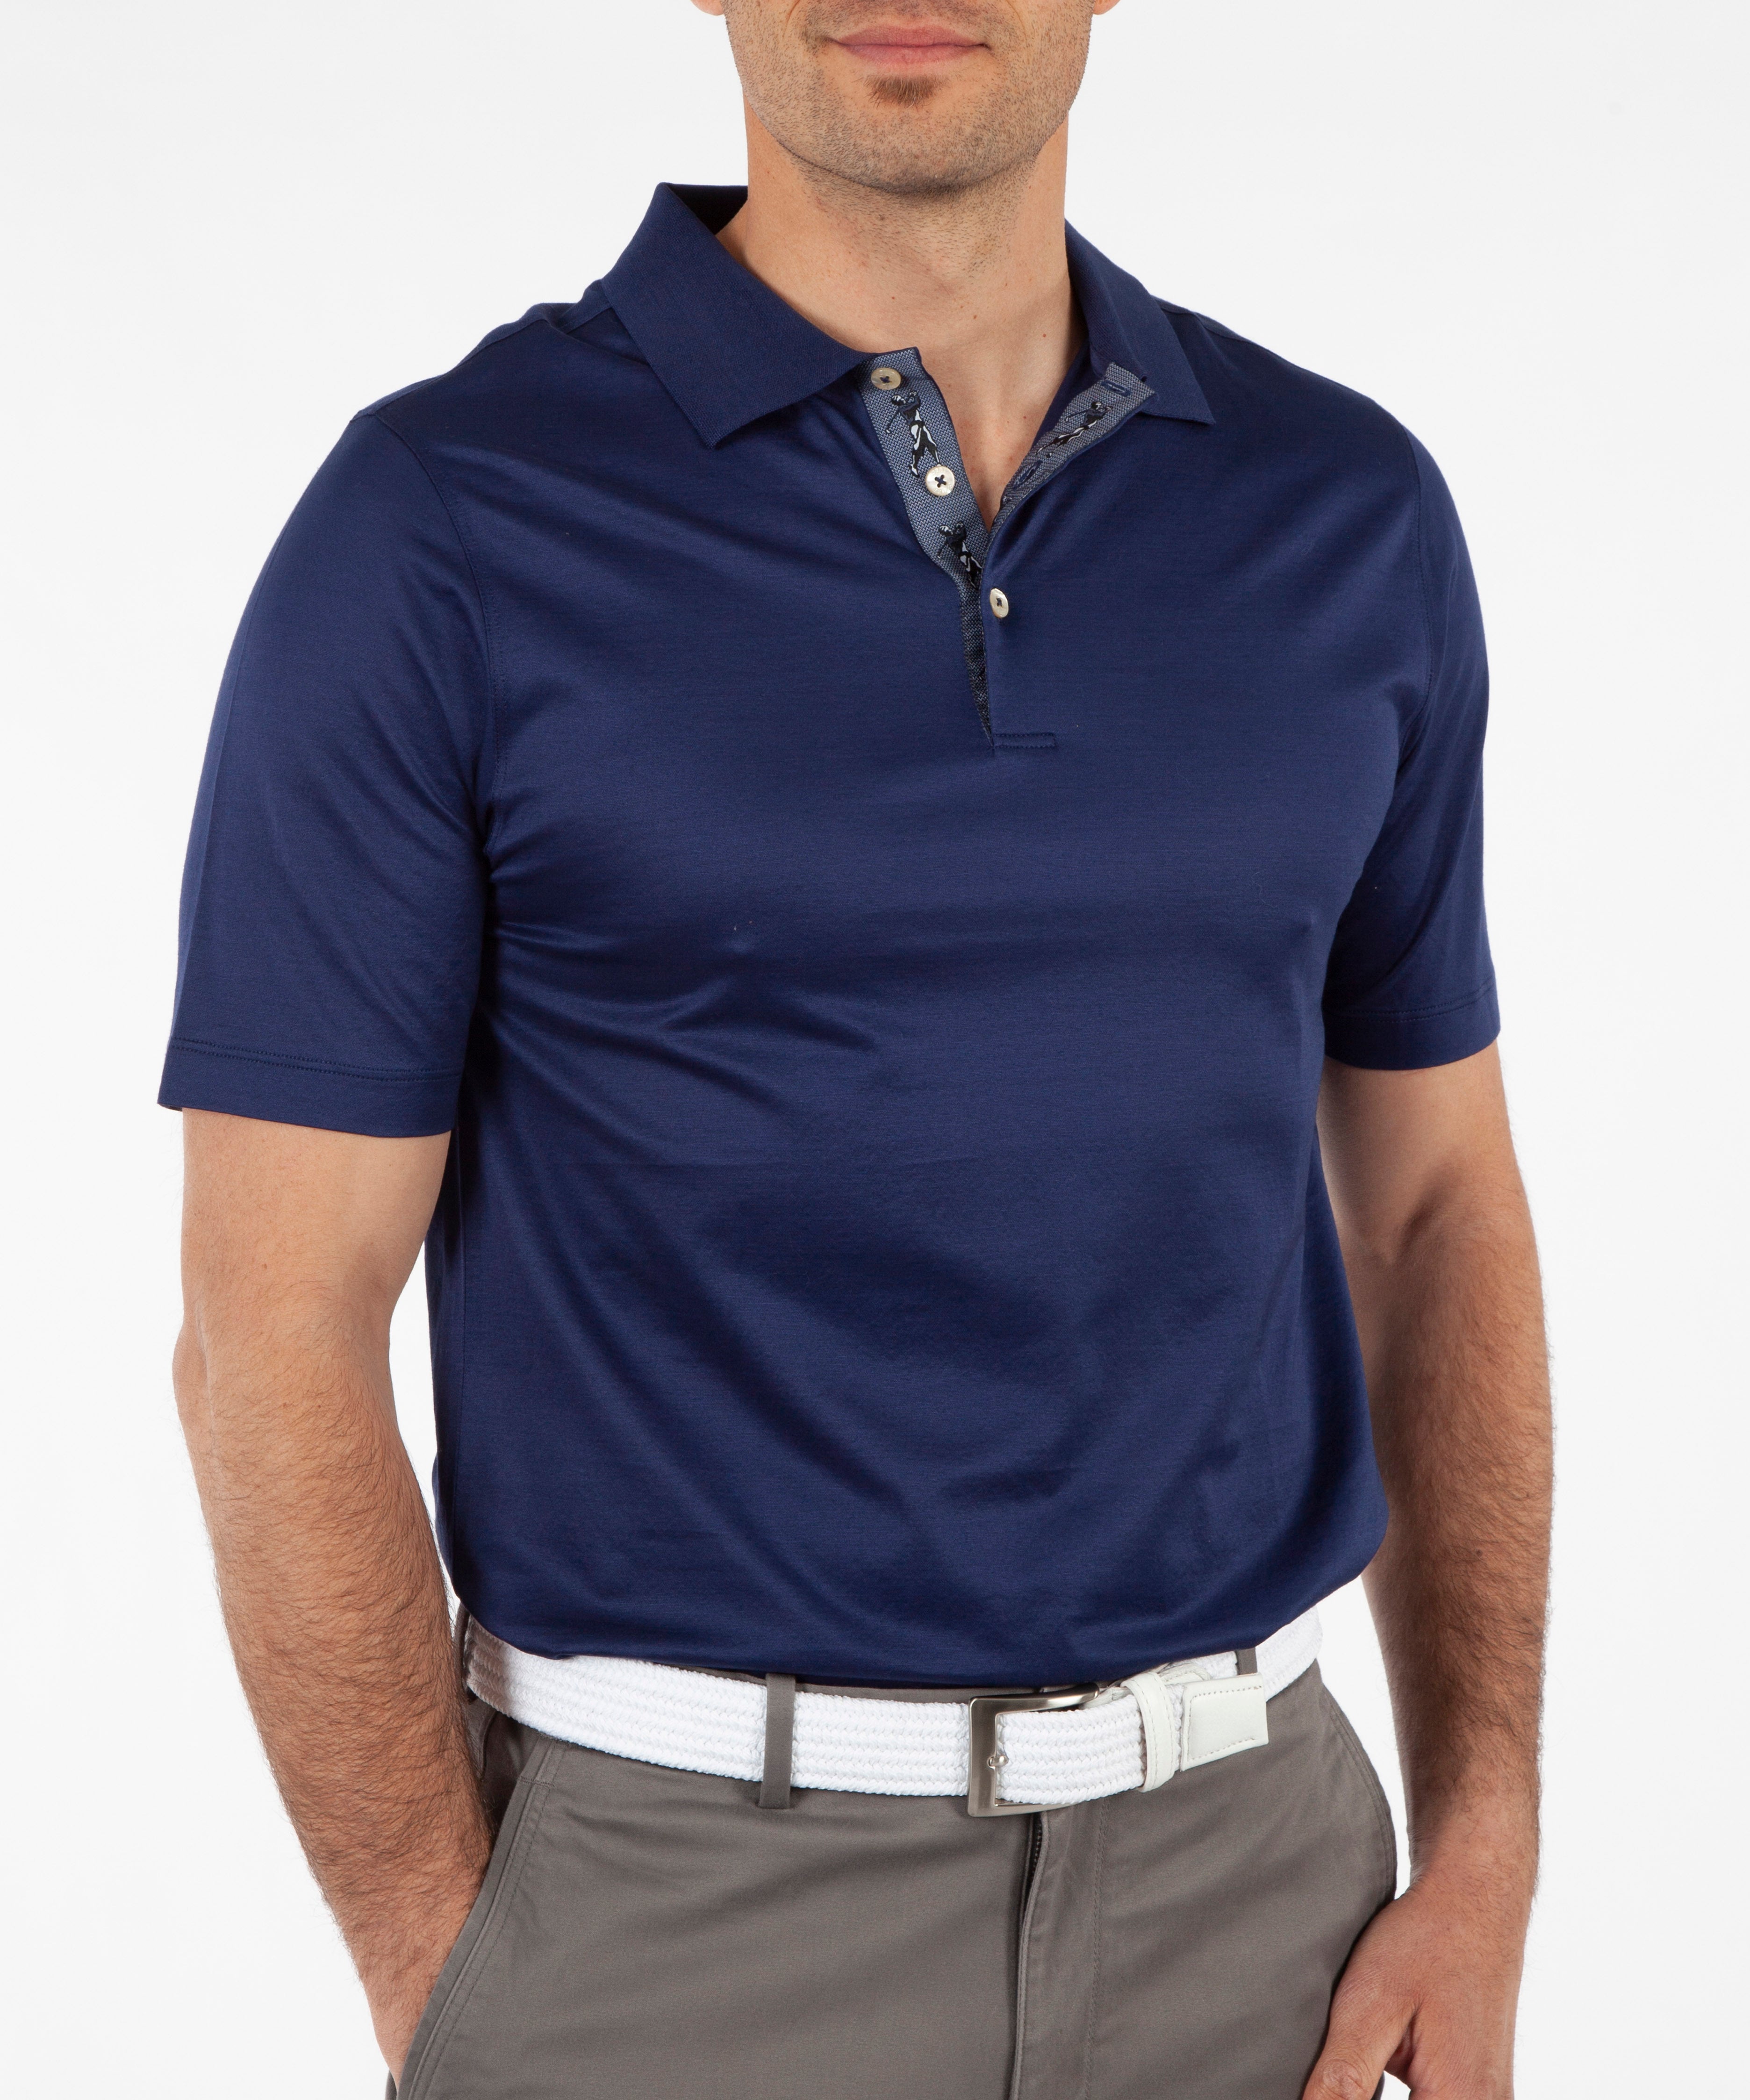 Heritage Luxe 100% Italian Cotton Oxford Solid Polo Shirt